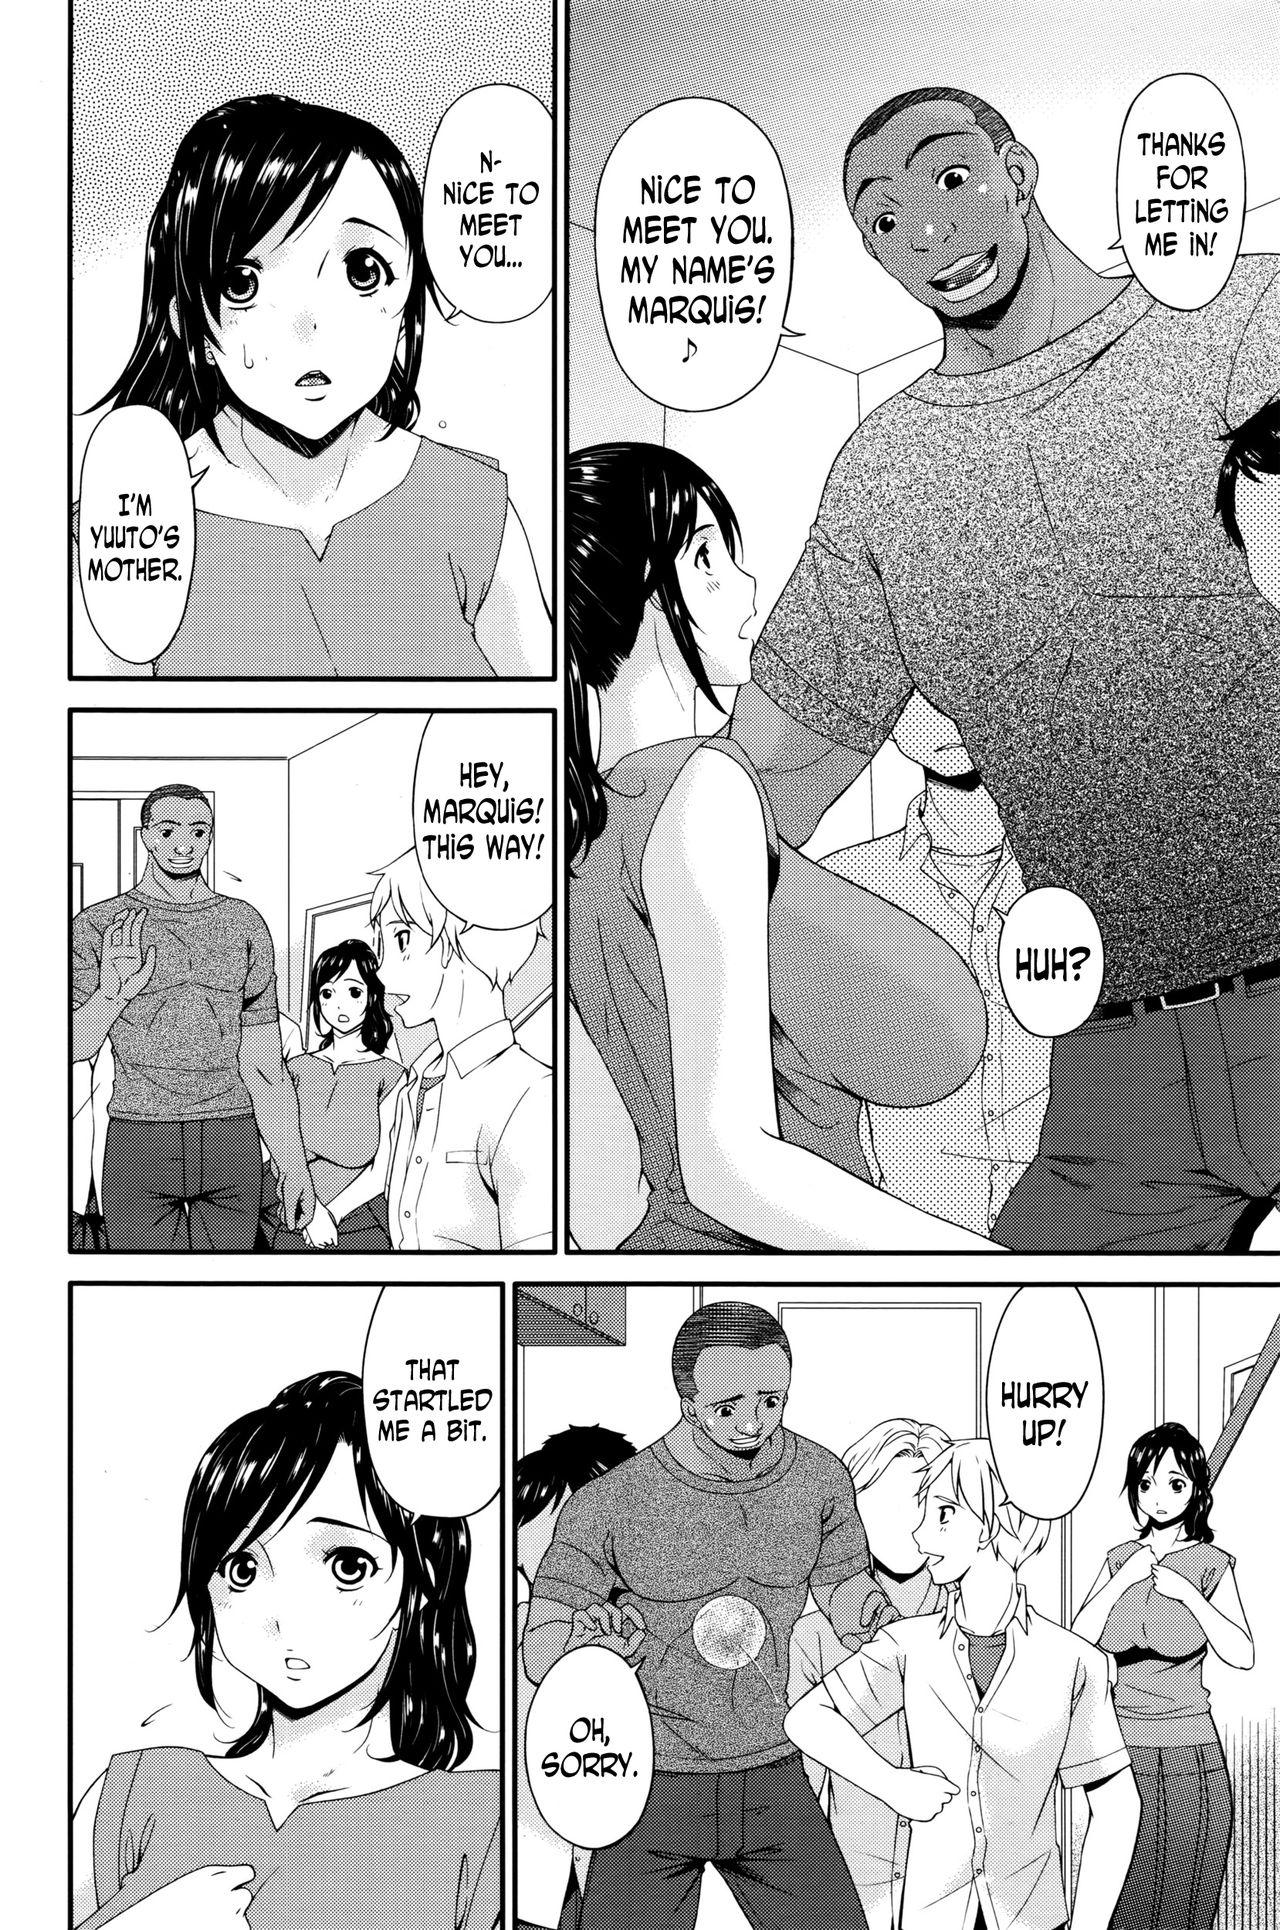 Blowing Youbo | Impregnated Mother Ch. 1-13 Harcore - Page 2